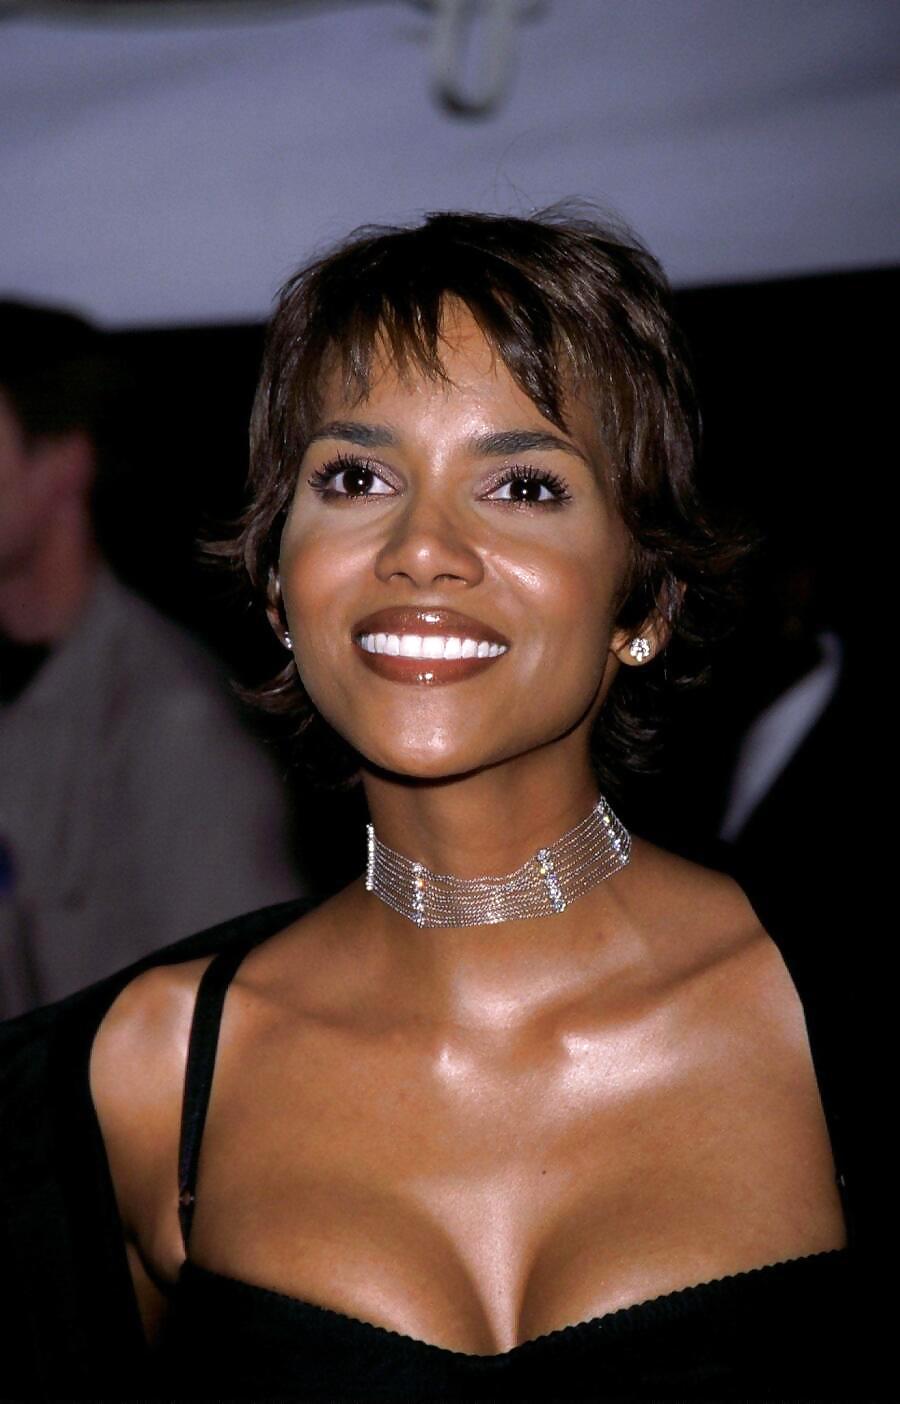 Halle berry ultimate glamour, scollatura, tappi
 #8354264